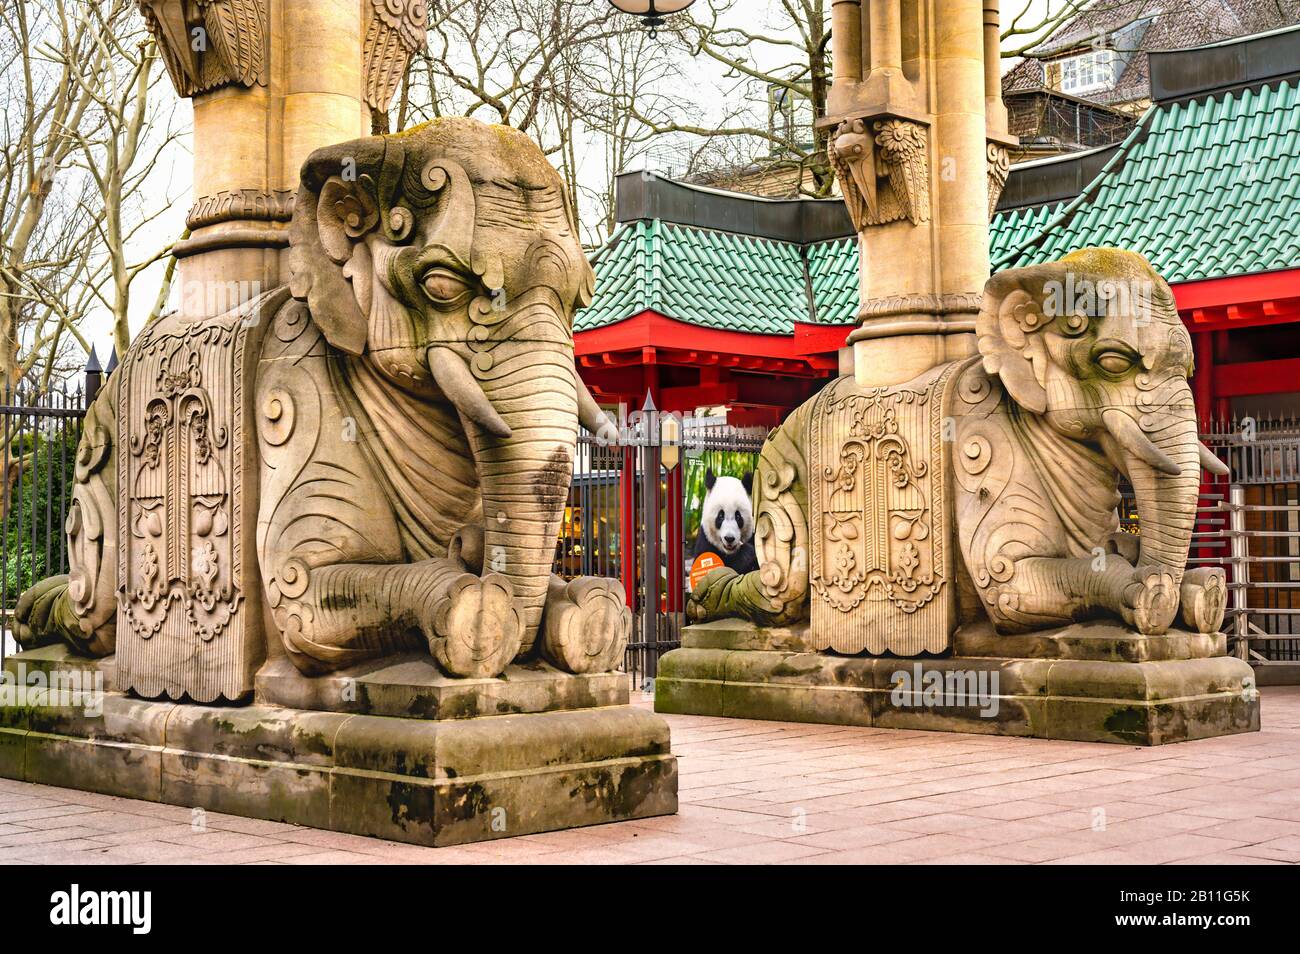 Berlin, Germany - February 21, 2020: View to the famous elephant gate of the Berlin Zoological Garden with its stone sculptures and the Asian-looking Stock Photo